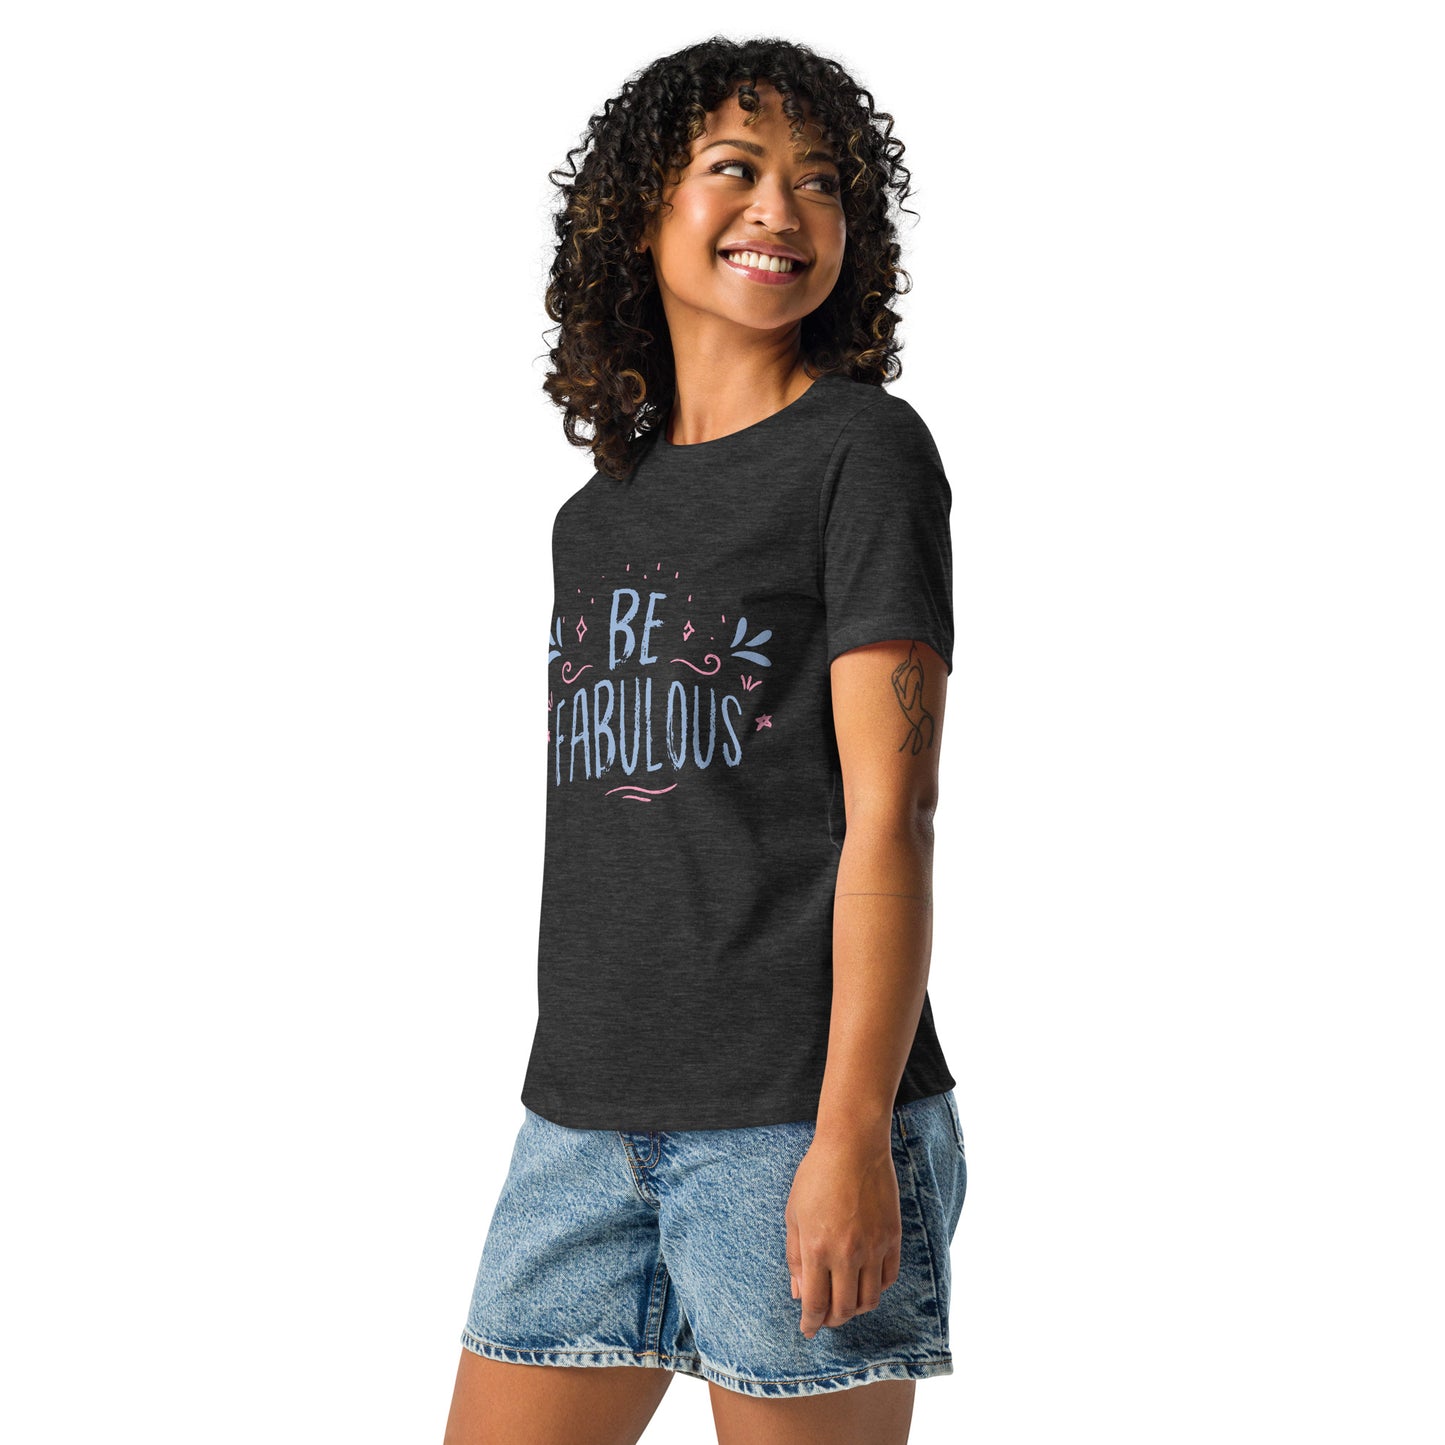 Be Fabulous Tee, Self Love, Confidence Women's Relaxed T-Shirt